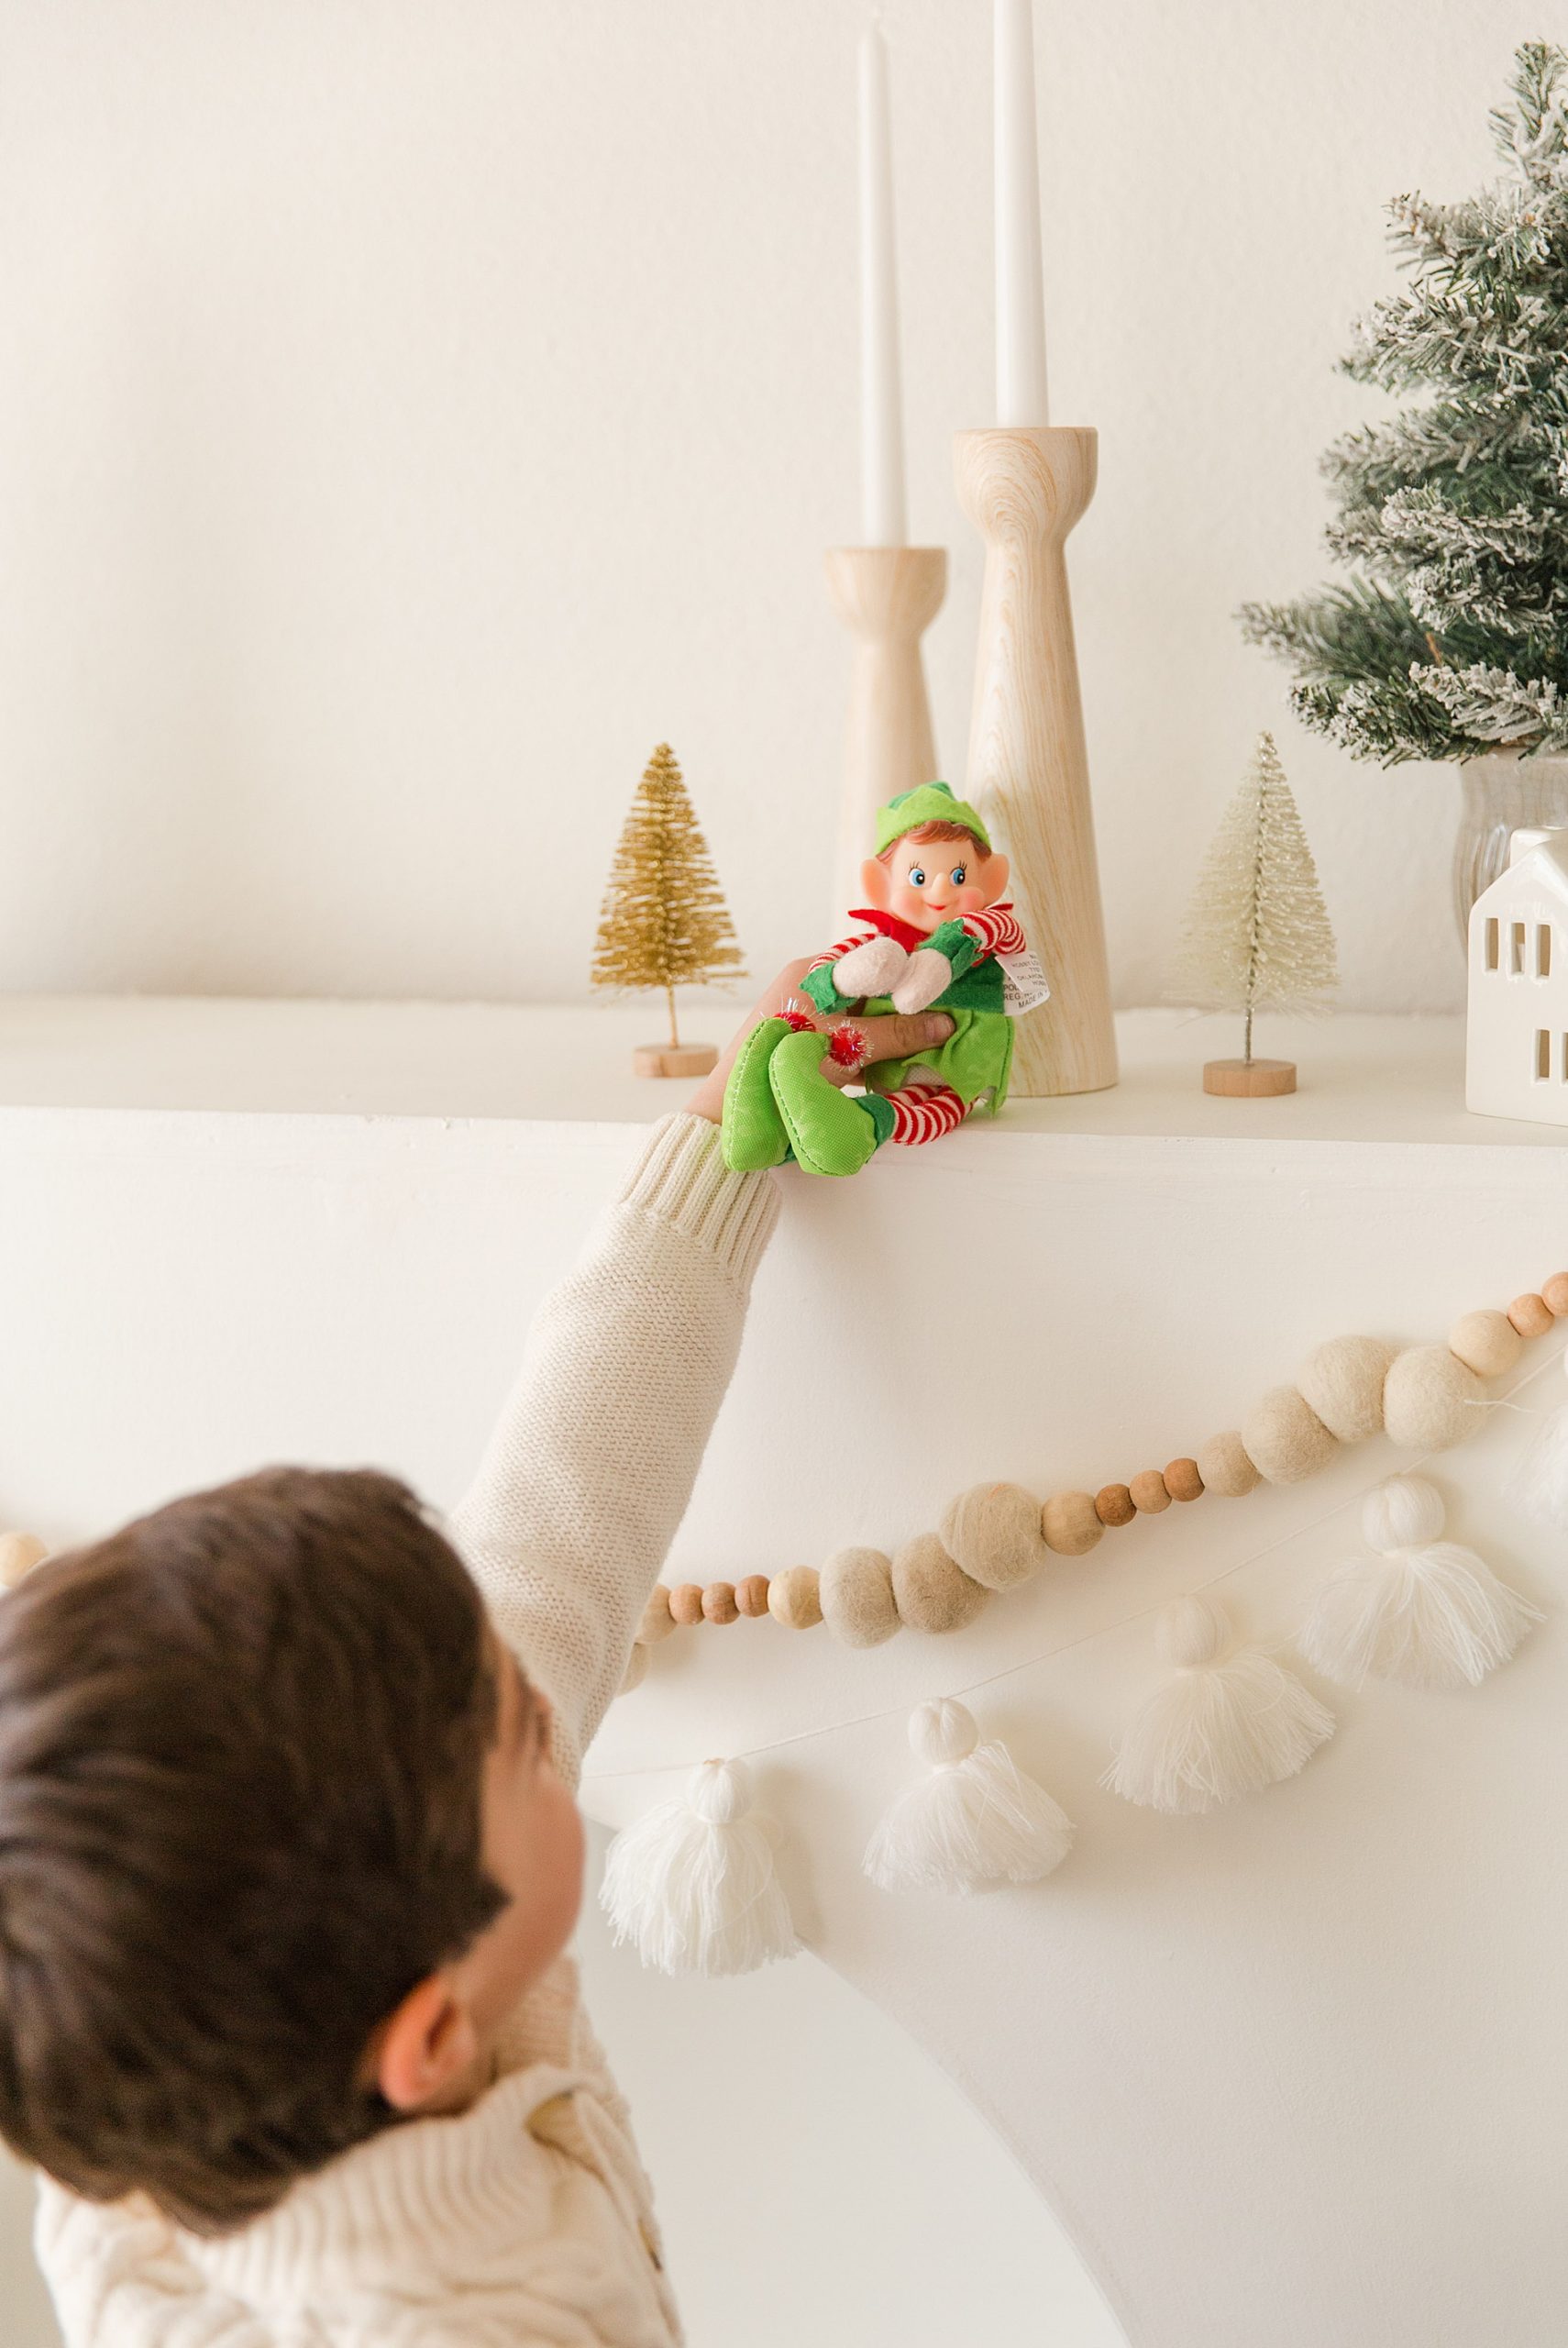 little boy places green elf on the shelf of the fireplace